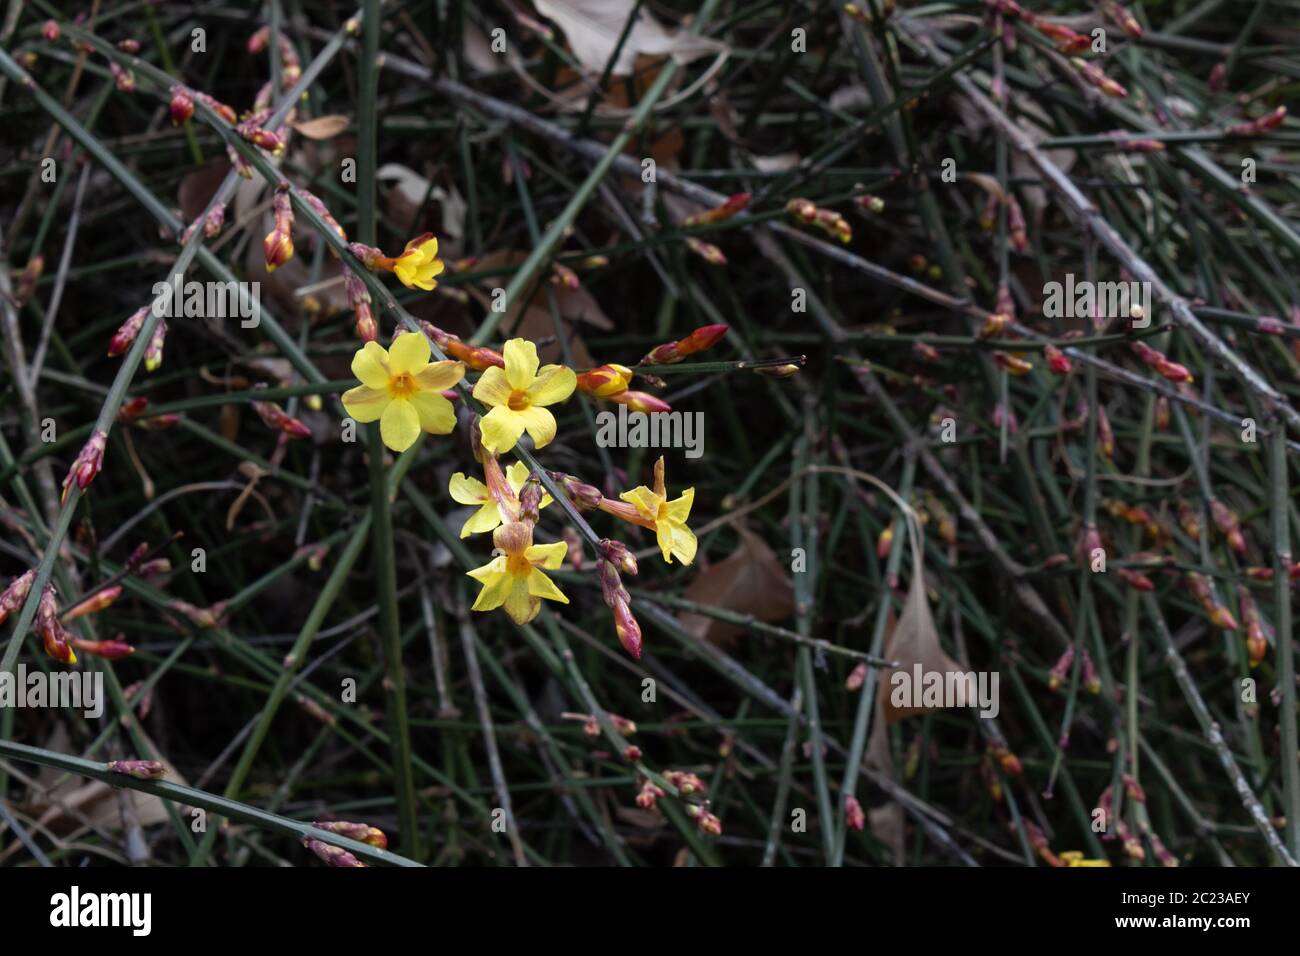 Winter Jasmine, Jasminum nudiflorum Oleaceae,  small yellow flowers against a dark background of vines and branches, horizontal aspect Stock Photo